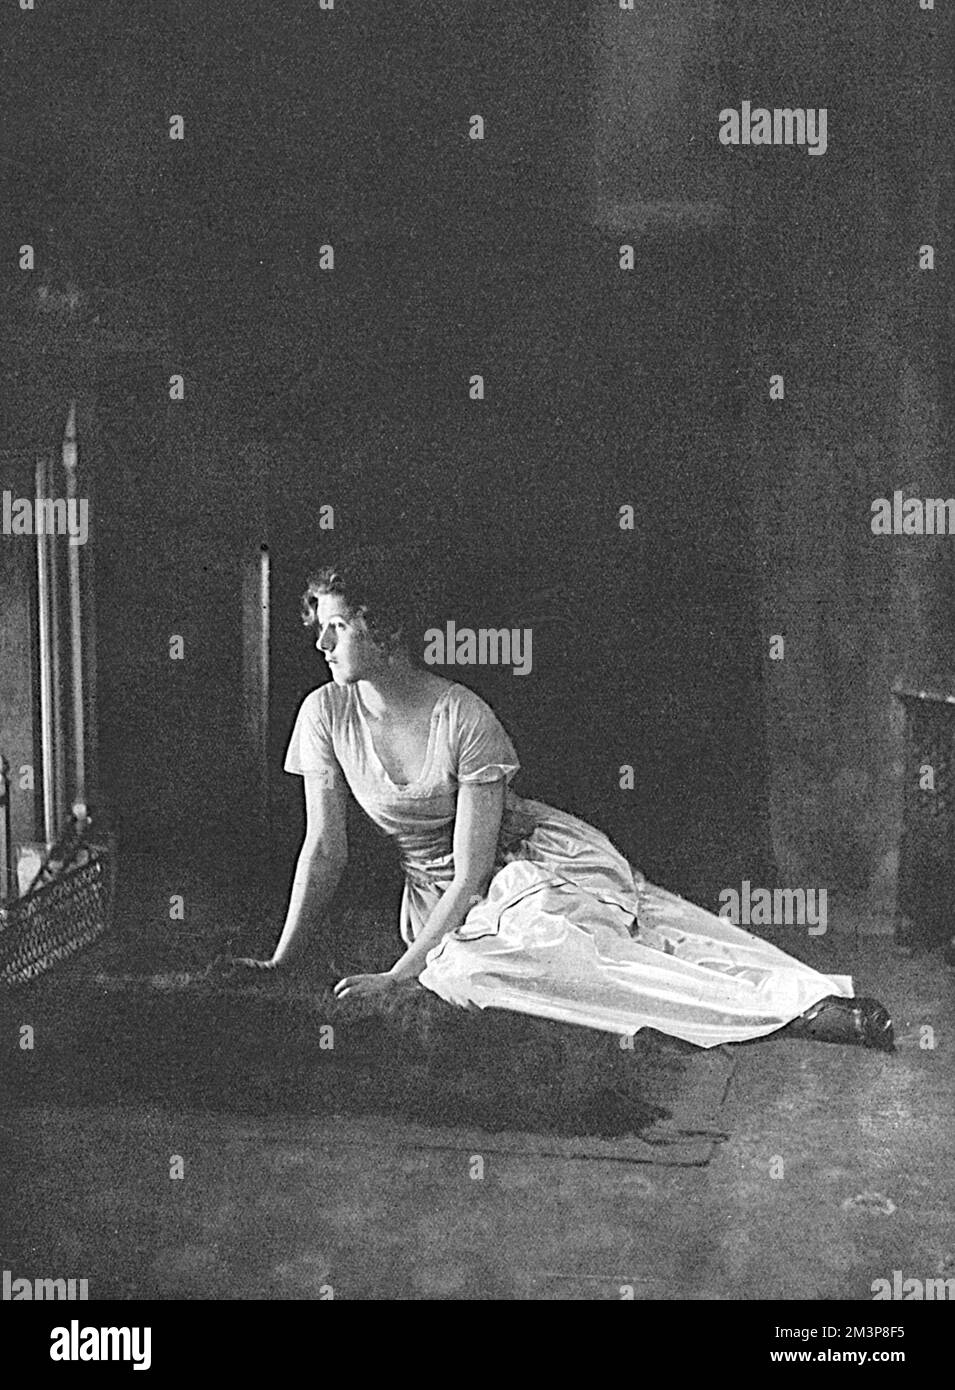 Clarissa Madeleine Georgiana Felicite Tennant (1896 - 1960), daughter of 1st Baron Glenconner pictured staring into the fire.  She was one of the last debutantes to be presented at court in the summer of 1914, before the Great War interrupted the tradition.  She married three times, first to Adrian Bethell in 1915 (divorced 1918), then to Major Lionel Tennyson and finally to James Beck.  Barbara Cartland described her as, 'the most beautiful woman I had ever seen.' Stock Photo